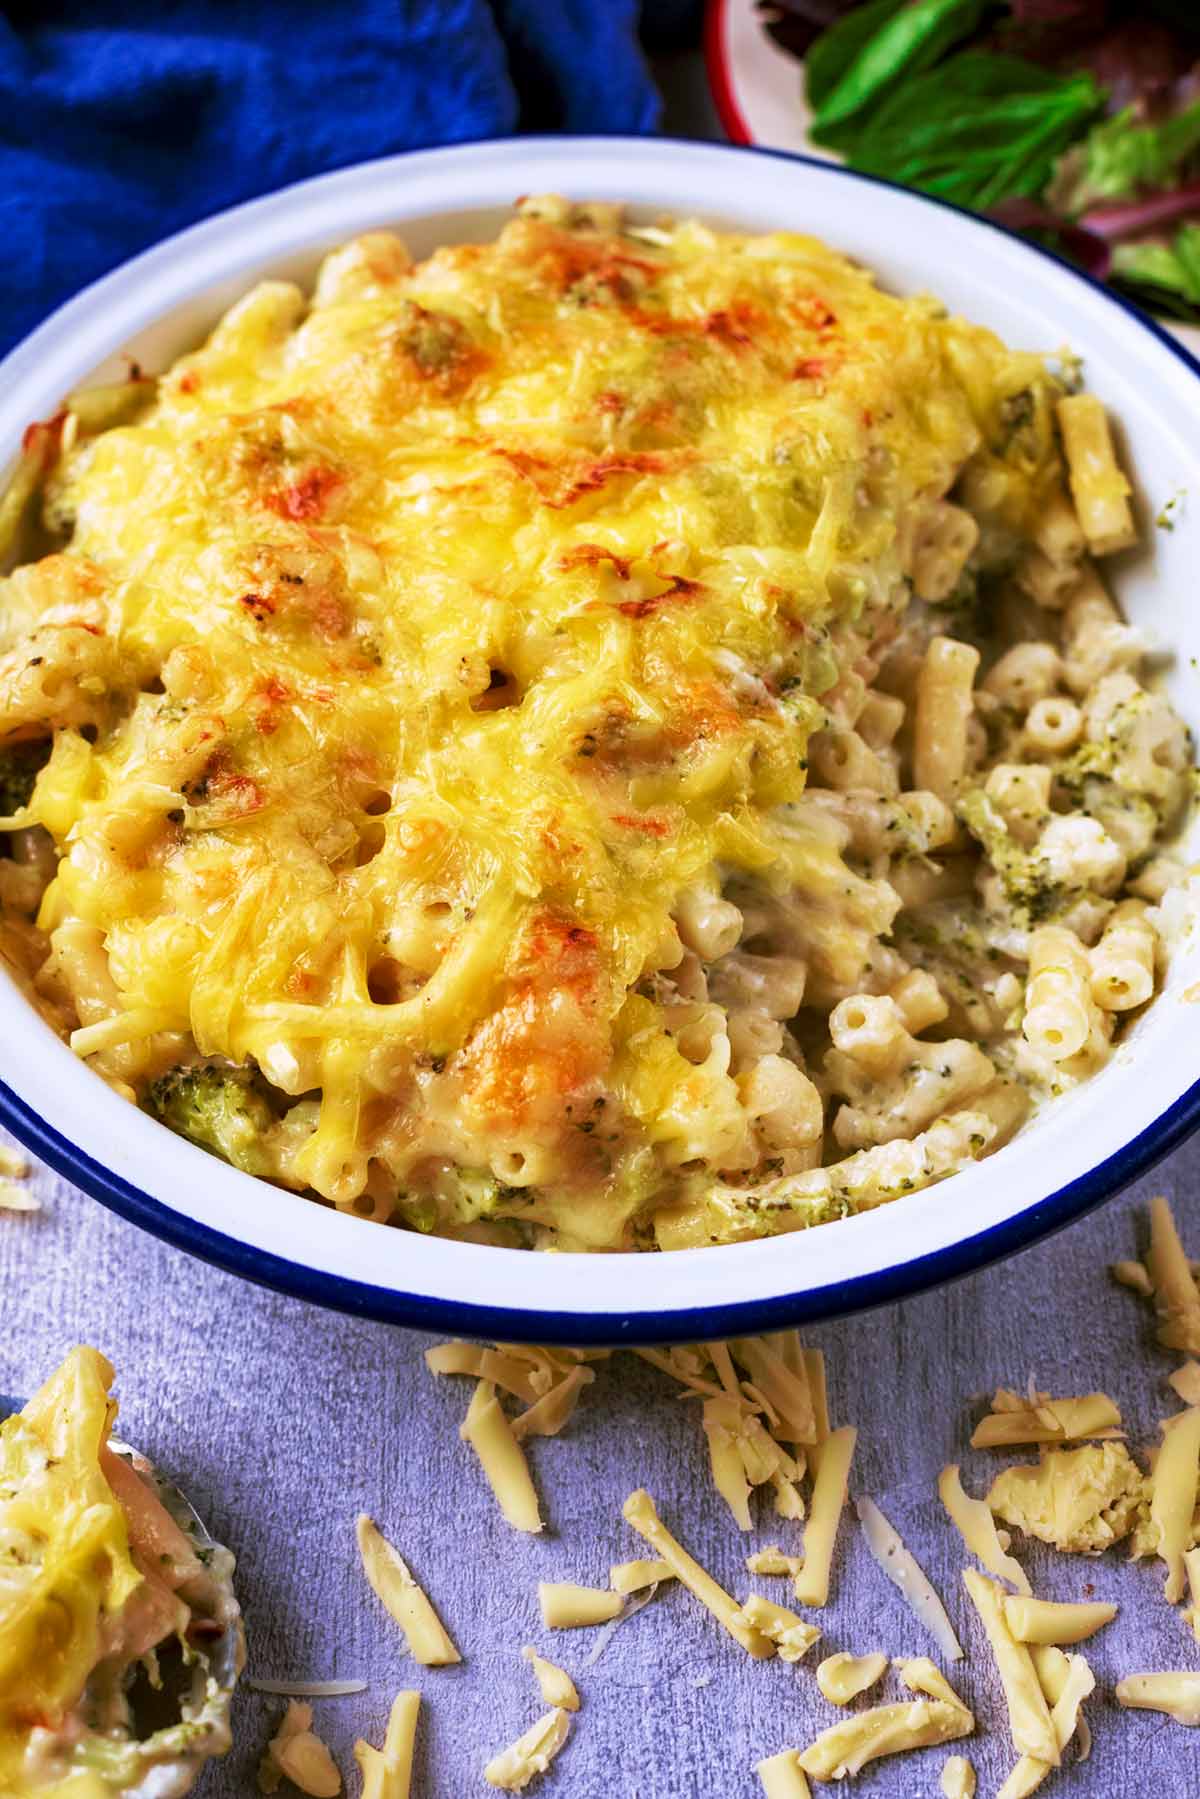 Macaroni Cheese in a dish surrounded by grated cheese.